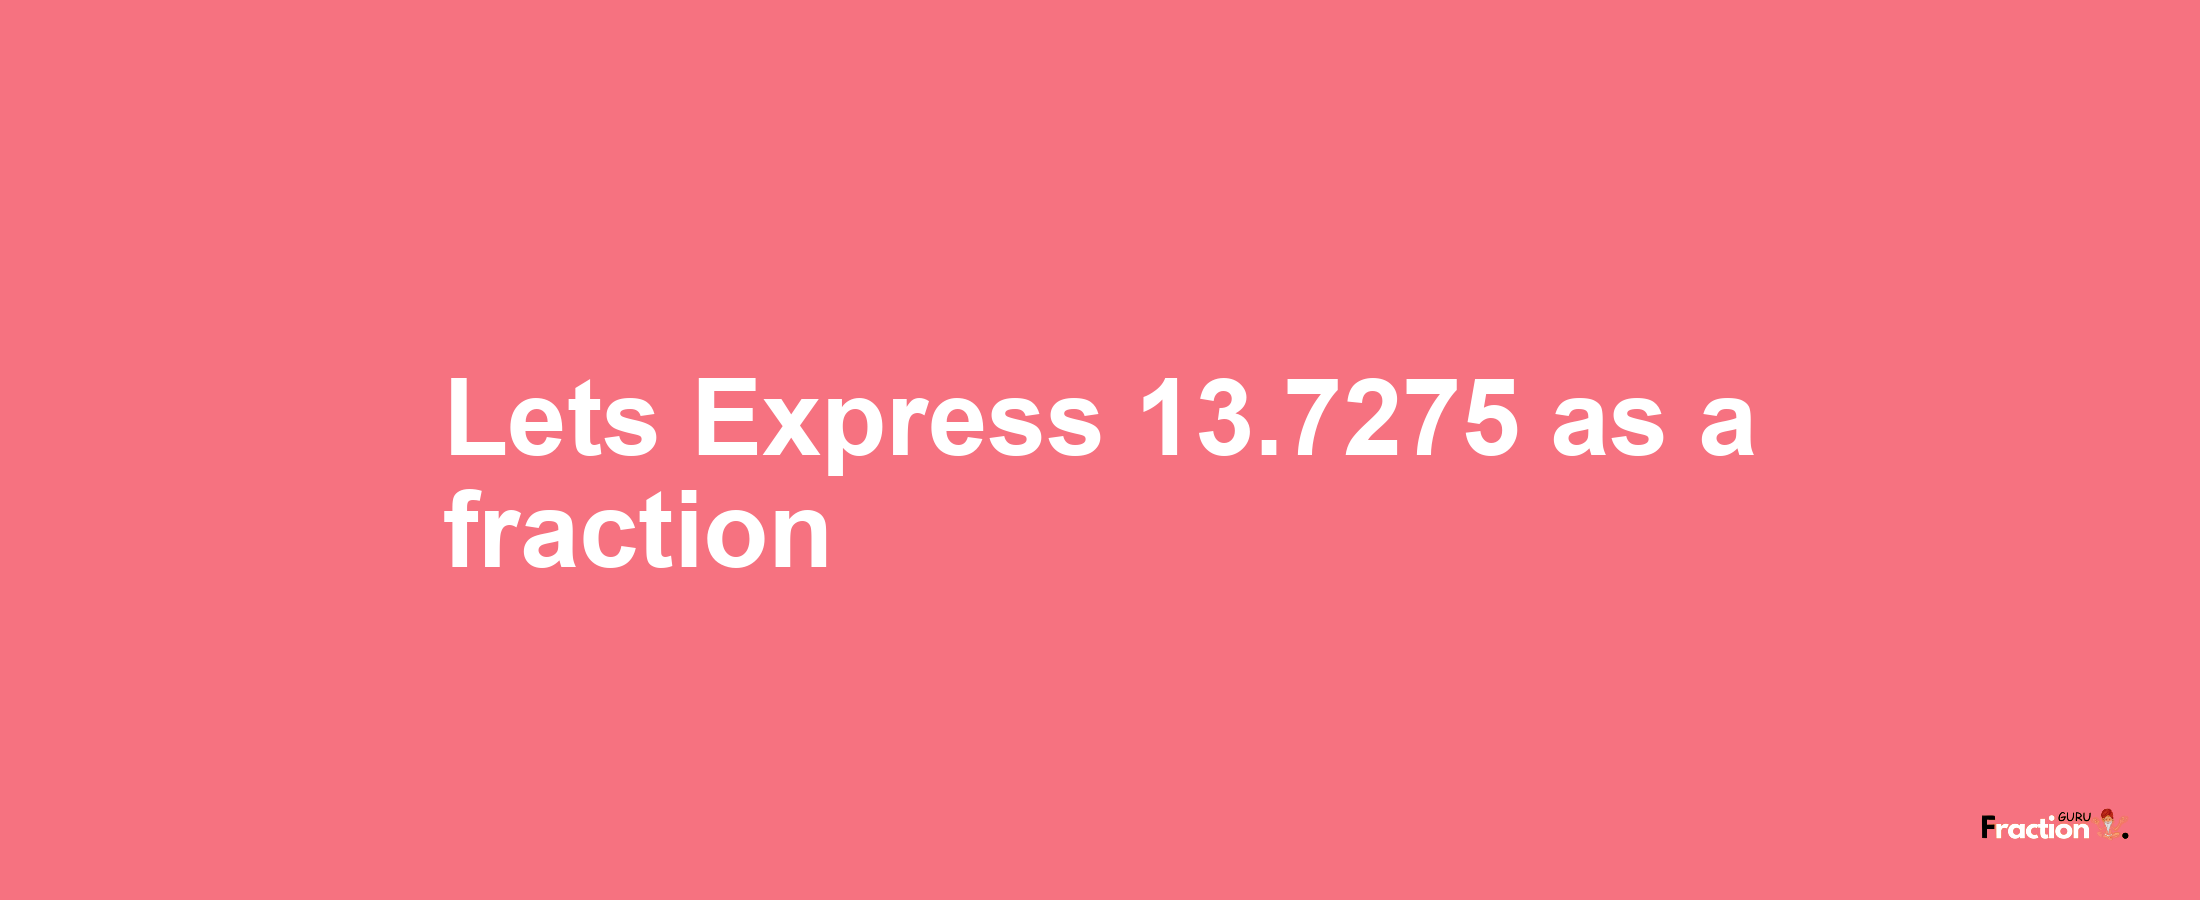 Lets Express 13.7275 as afraction